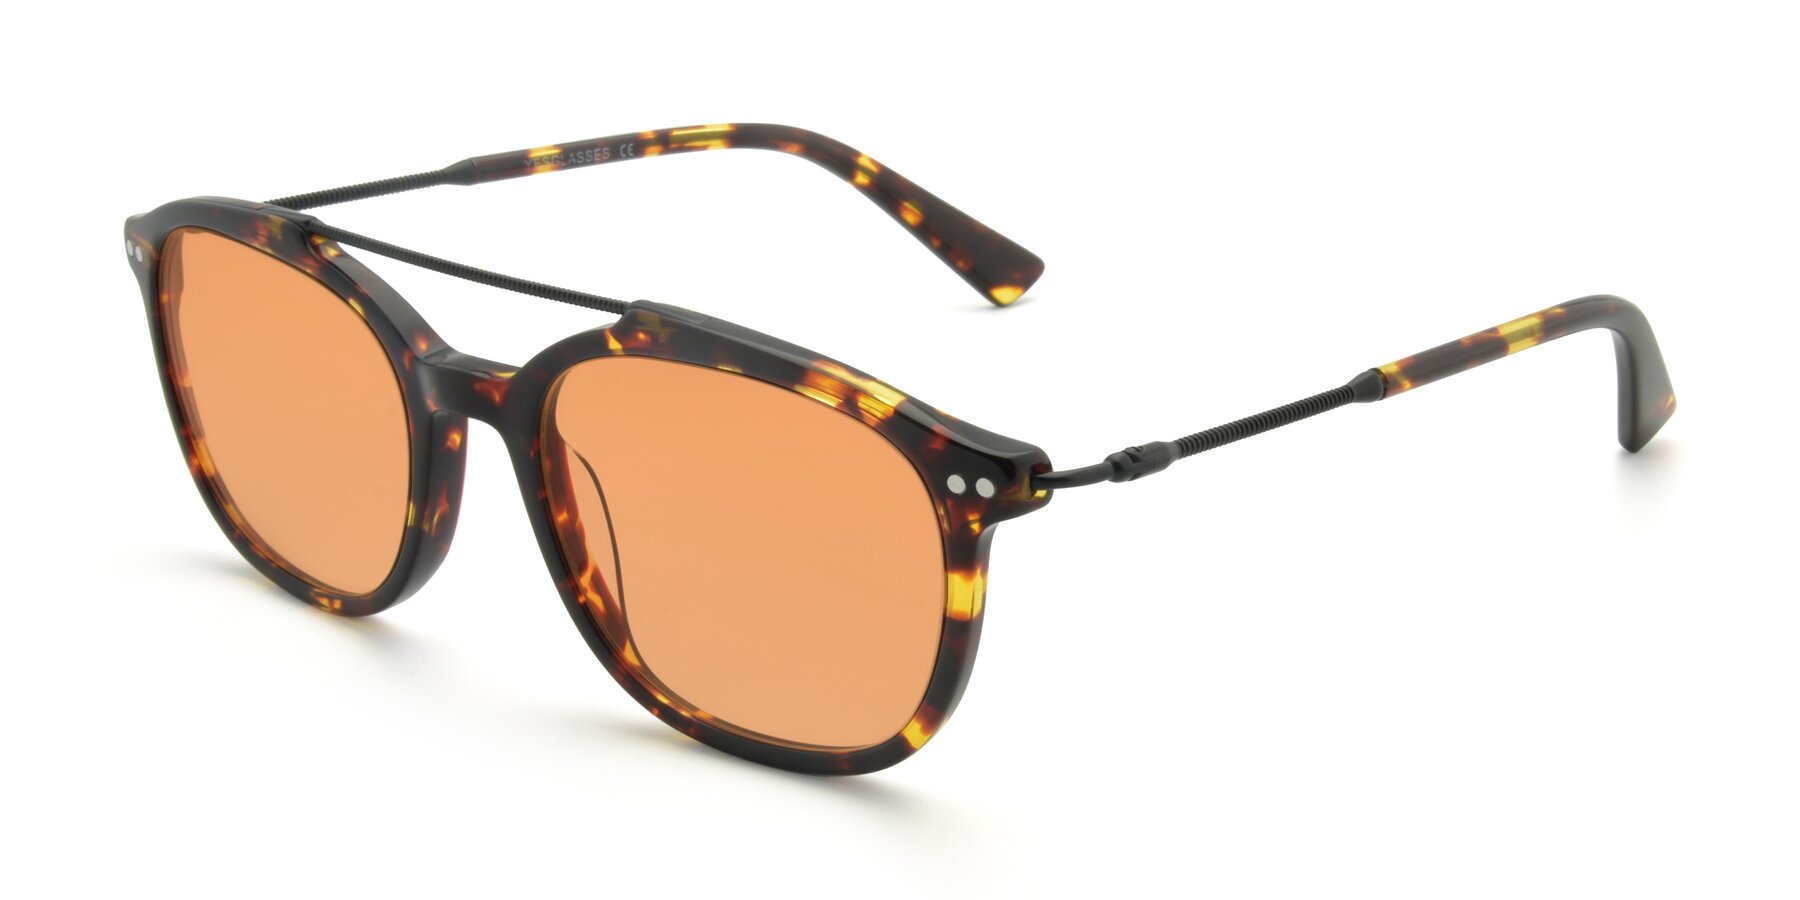 Angle of 17150 in Tortoise Brown with Medium Orange Tinted Lenses